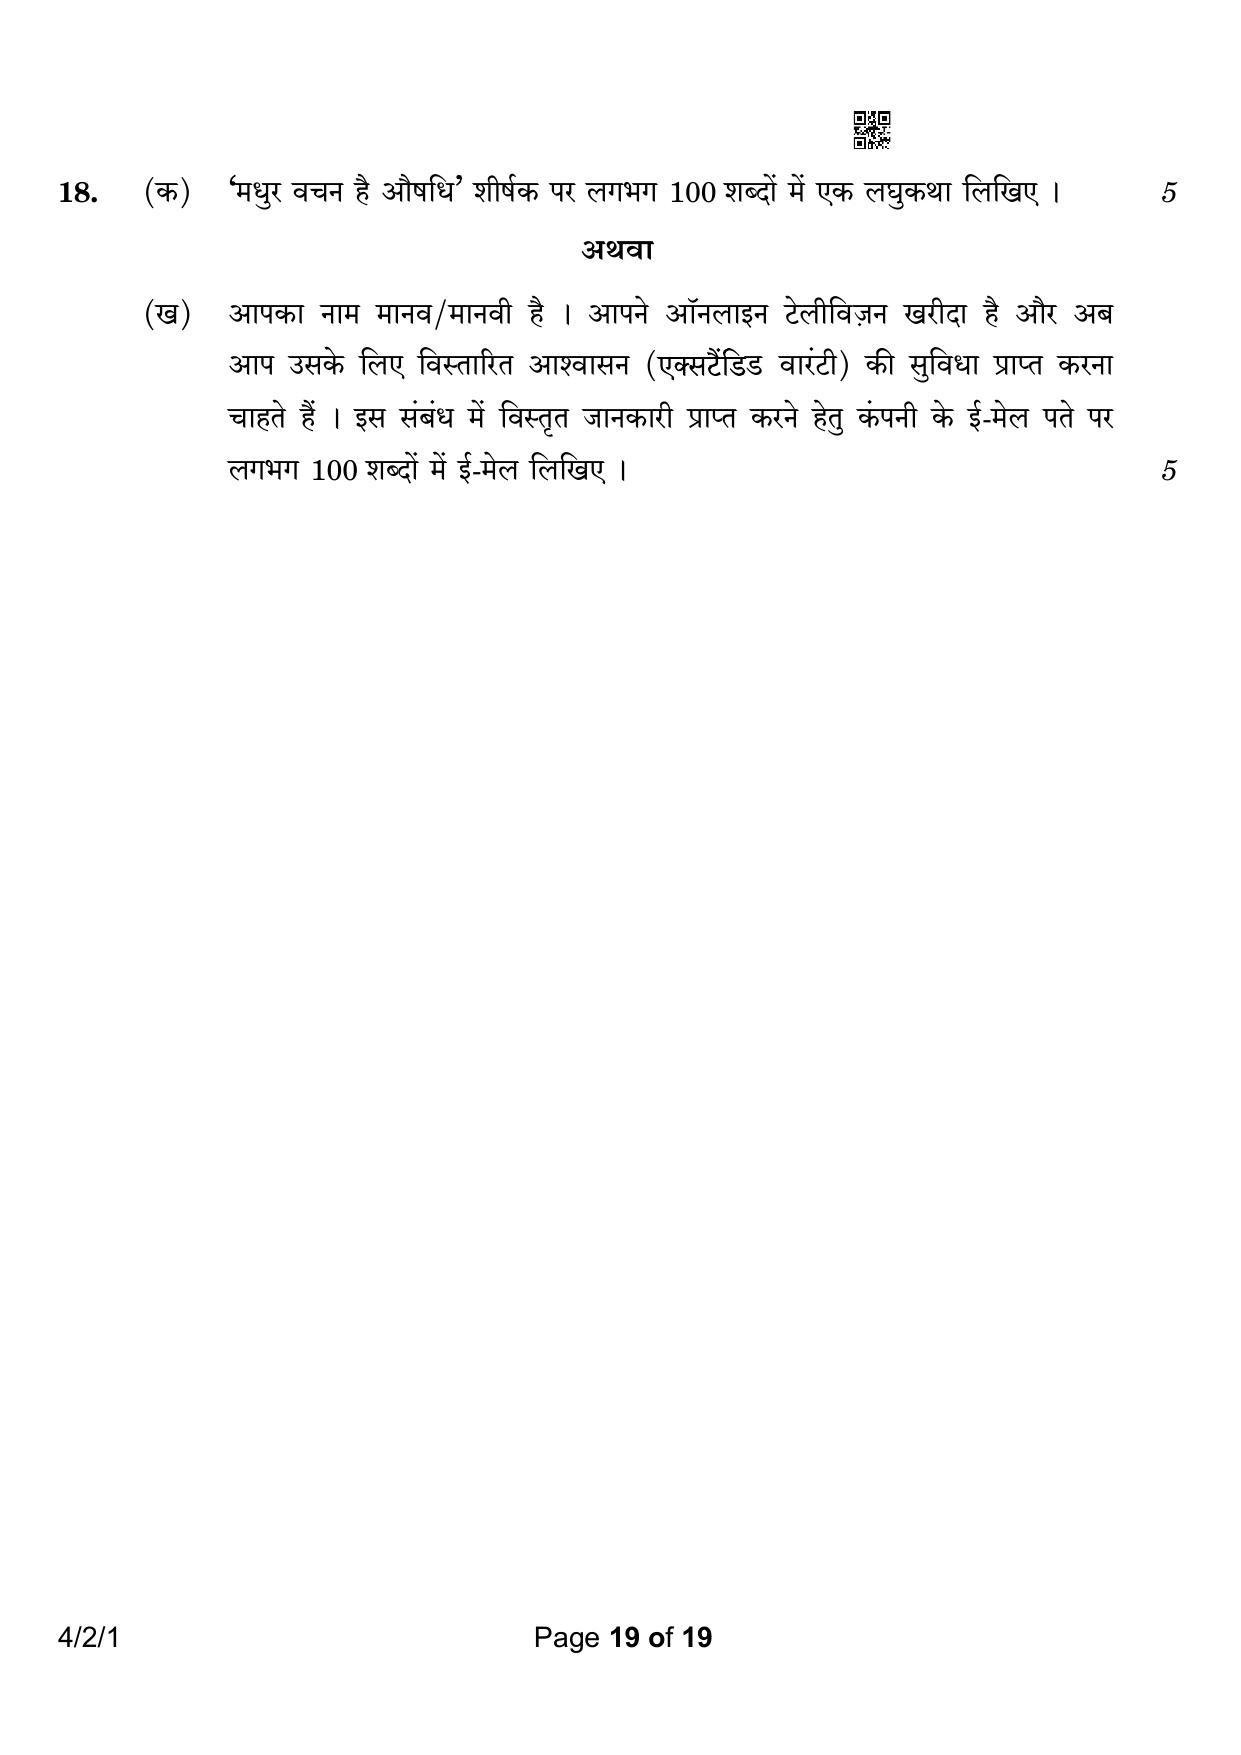 CBSE Class 10 4-2-1 Hindi B 2023 Question Paper - Page 19